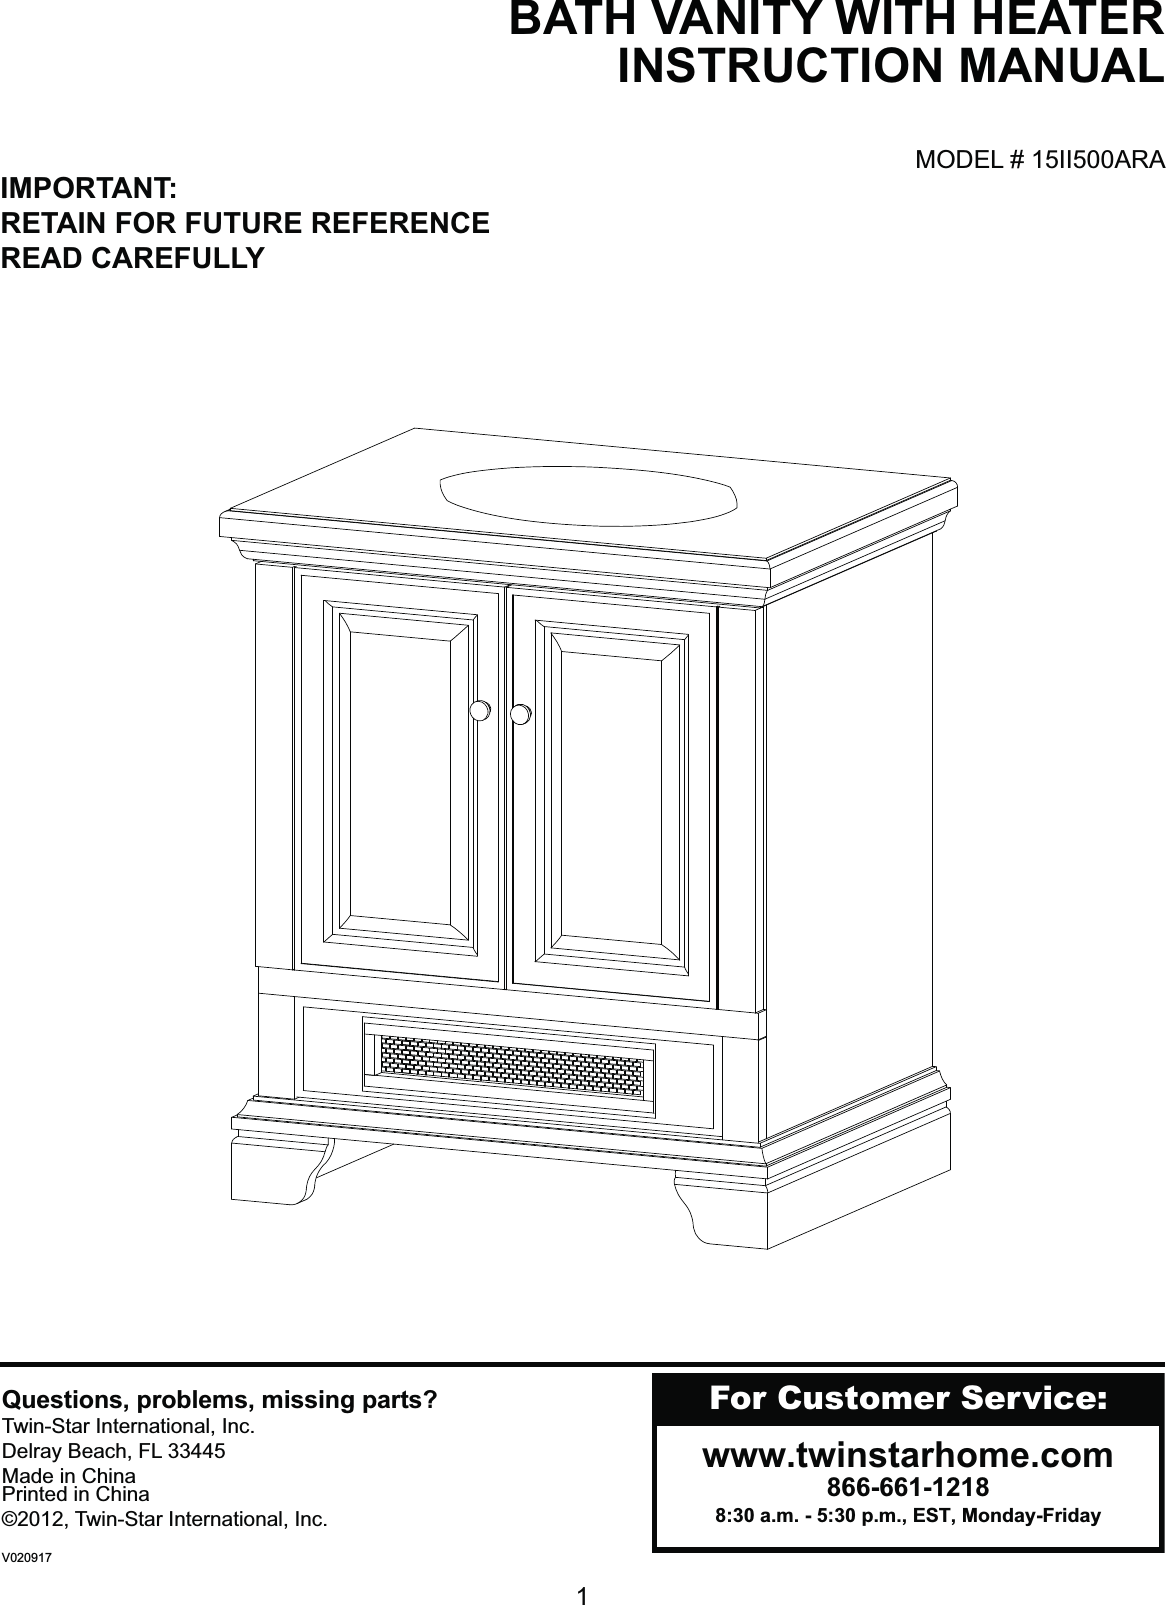 1MODEL # 15II500ARABATH VANITY WITH HEATERINSTRUCTION MANUALFor Customer Service:www.twinstarhome.com866-661-12188:30 a.m. - 5:30 p.m., EST, Monday-FridayIMPORTANT: RETAIN FOR FUTURE REFERENCEREAD CAREFULLYQuestions, problems, missing parts?Twin-Star International, Inc.Delray Beach, FL 33445Made in ChinaPrinted in China©2012, Twin-Star International, Inc.V020917